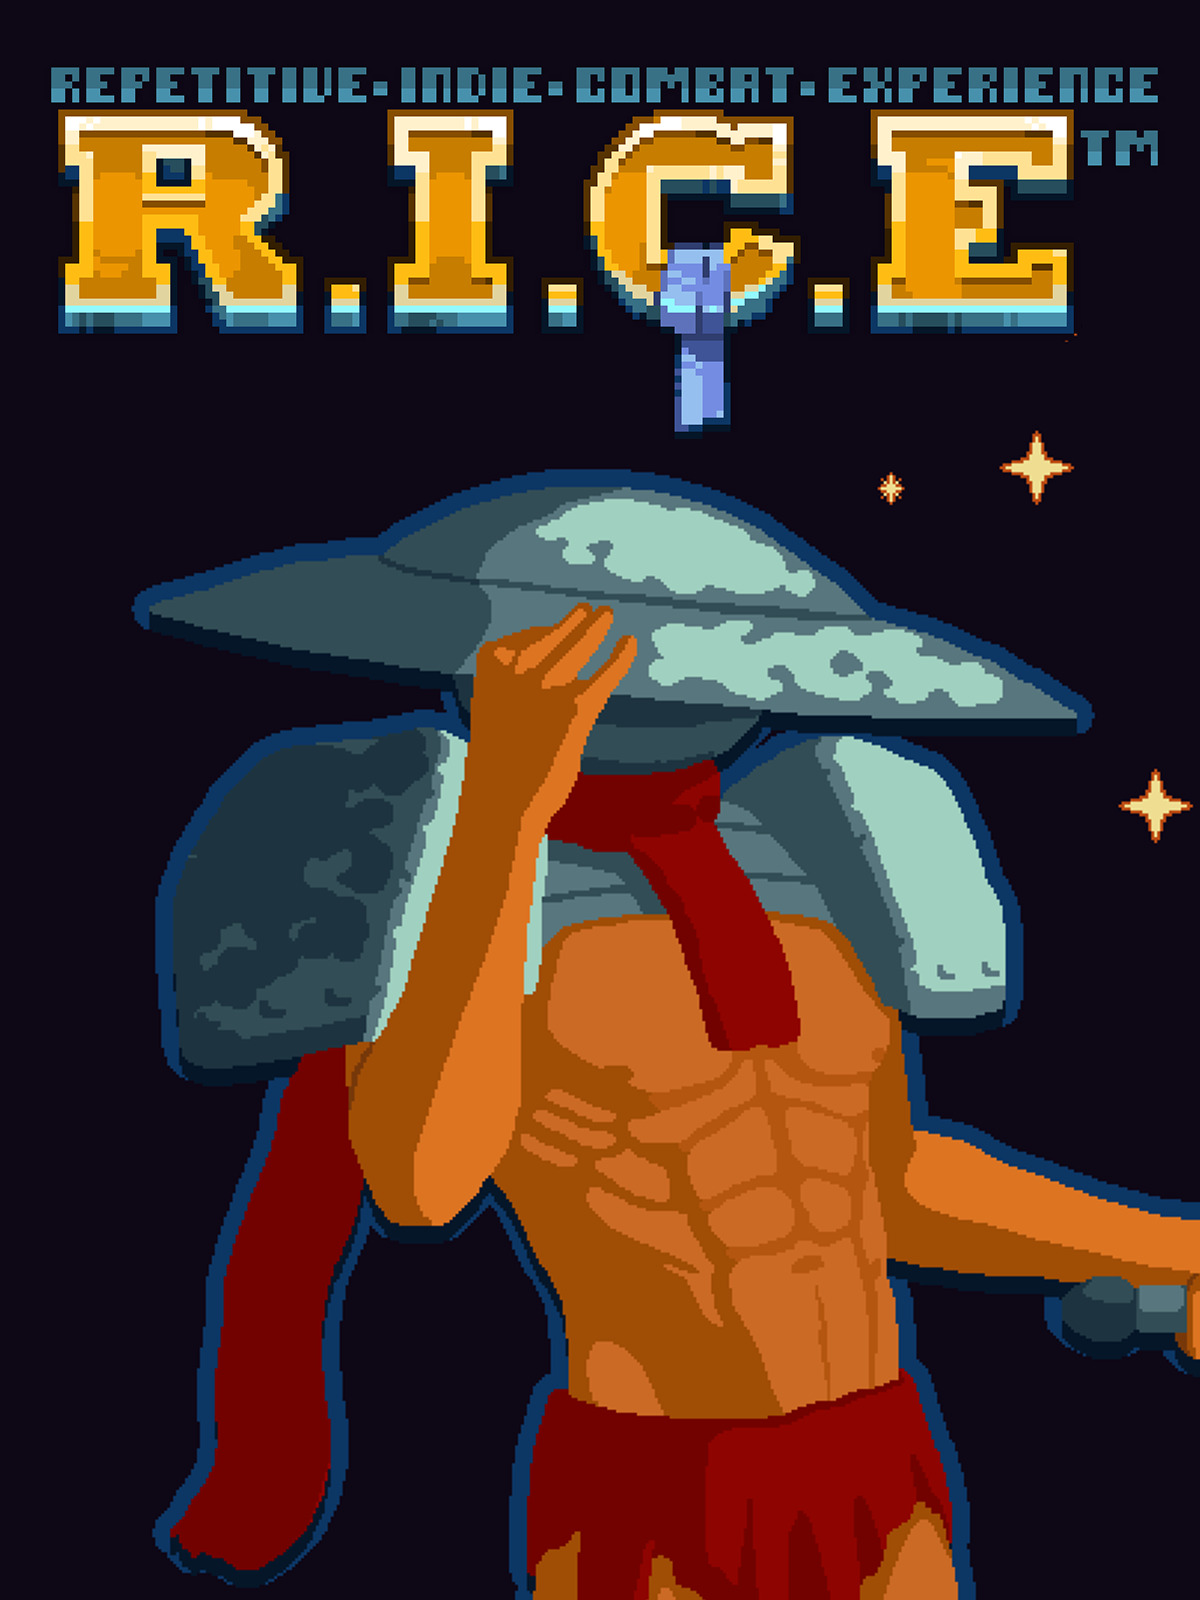 RICE – Repetitive Indie Combat Experience PC